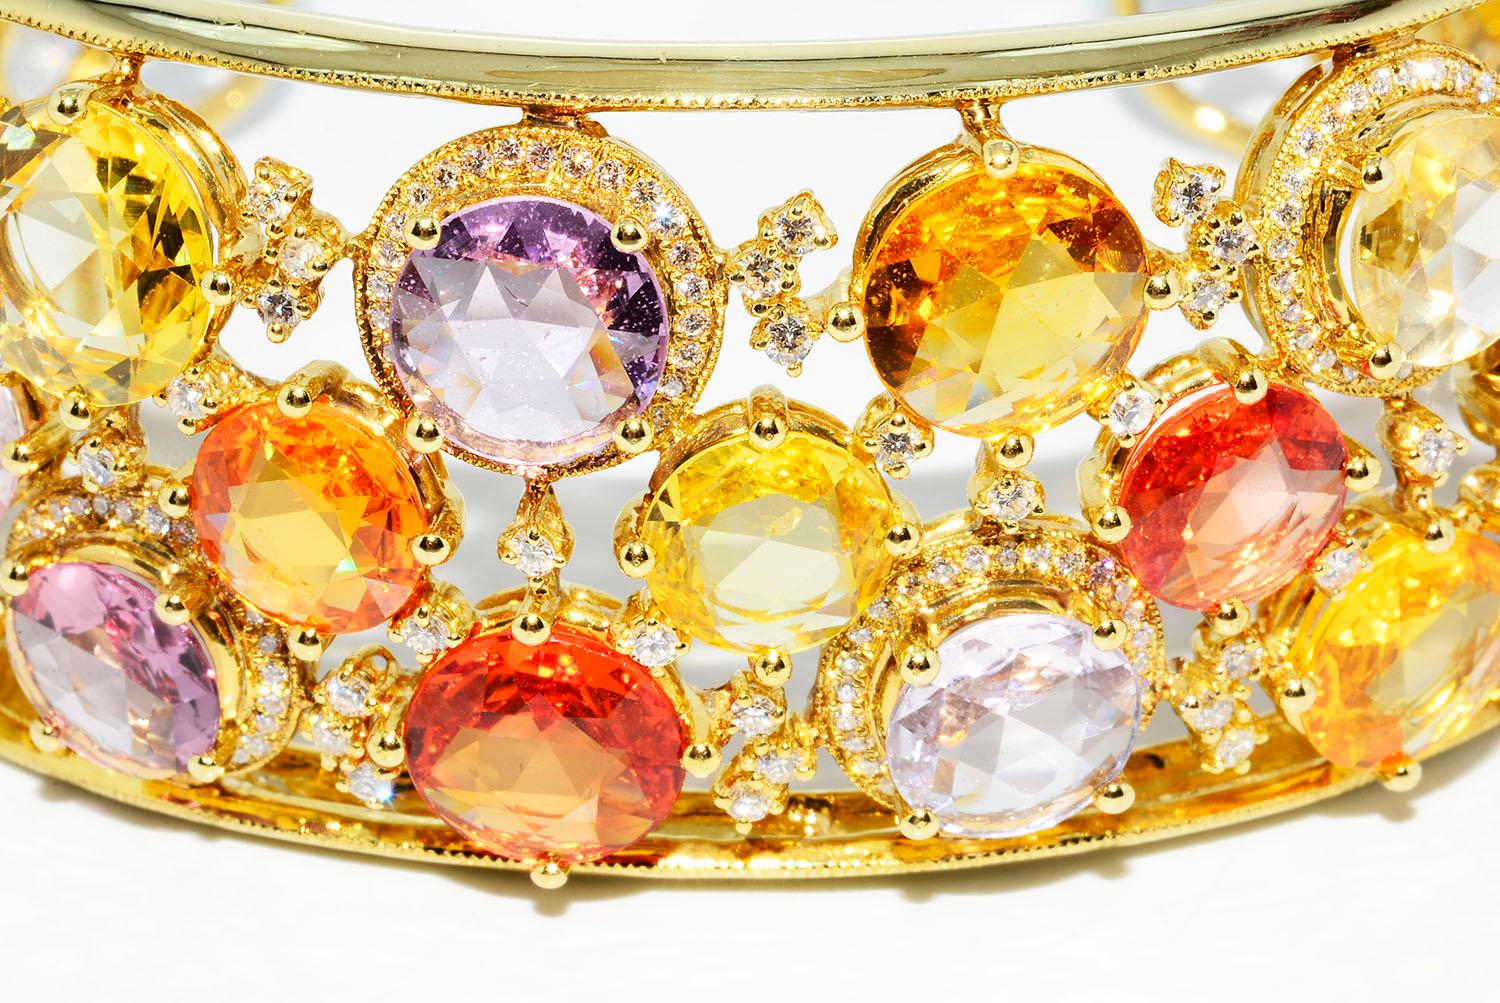 Magnificent Heat Only Multi color Sapphire and Diamond Bangle 18k Yellow Gold

Heat Only Multi Color Rose Cut Sapphires 74.64 ct
Round Diamonds 3.76 ct G VS2
18k Yellow Gold 75.73 Grams
Fits Wrist Sizes 7-8 Inches Length
